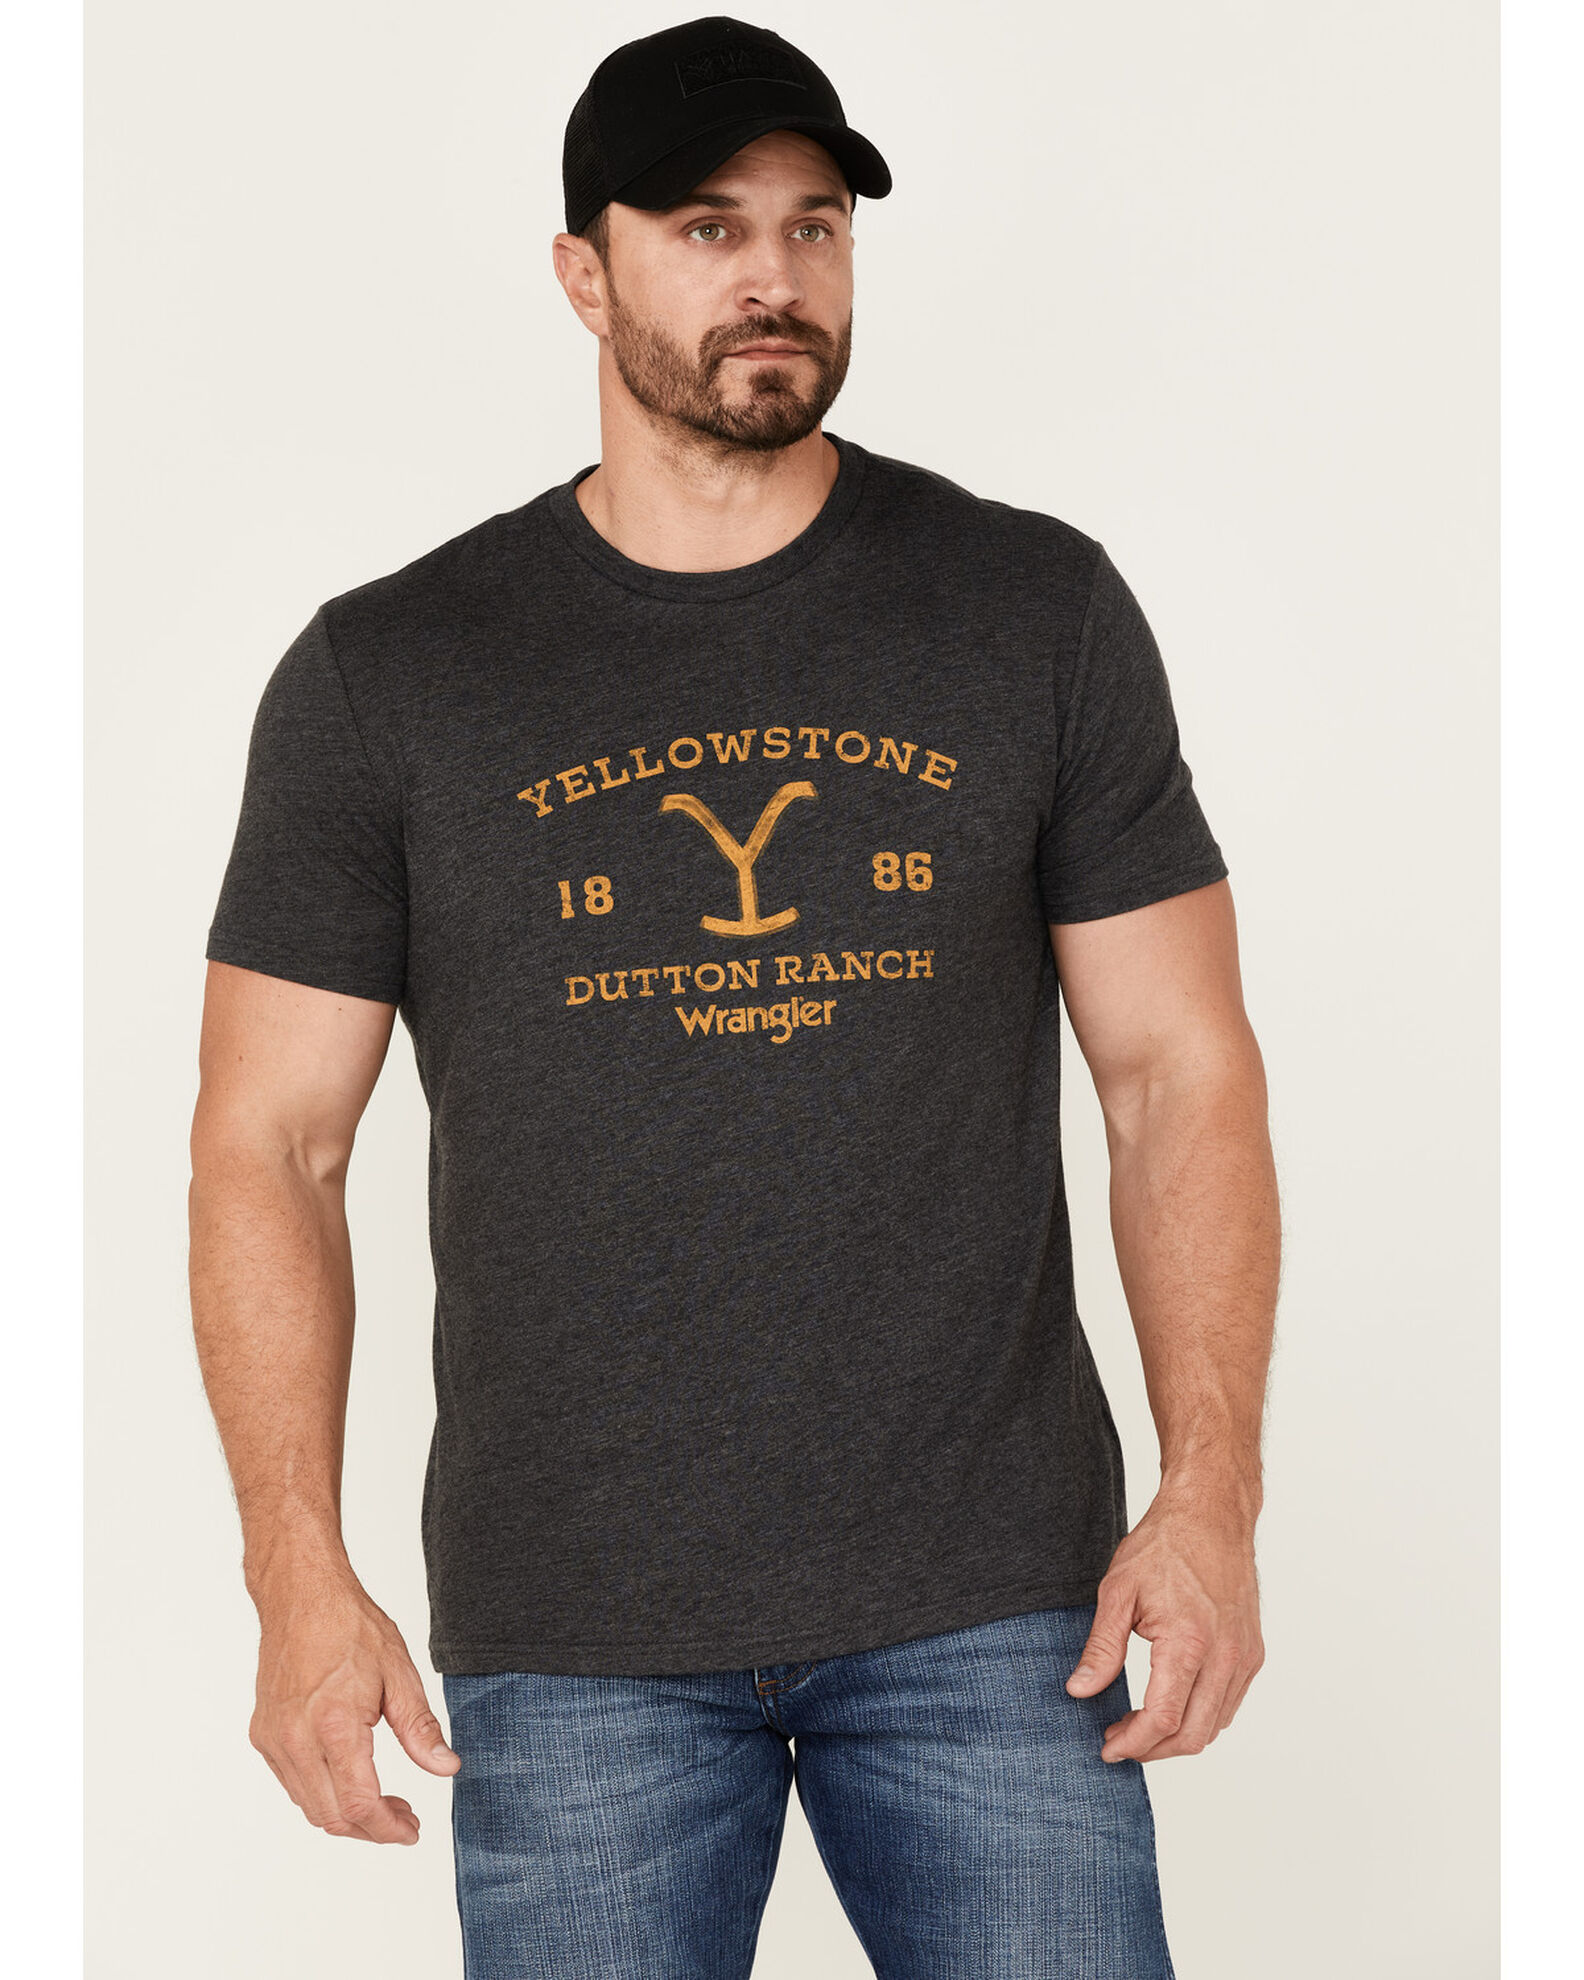 Wrangler Men's Heathered Yellowstone Dutton Ranch Logo Graphic T-Shirt -  Country Outfitter